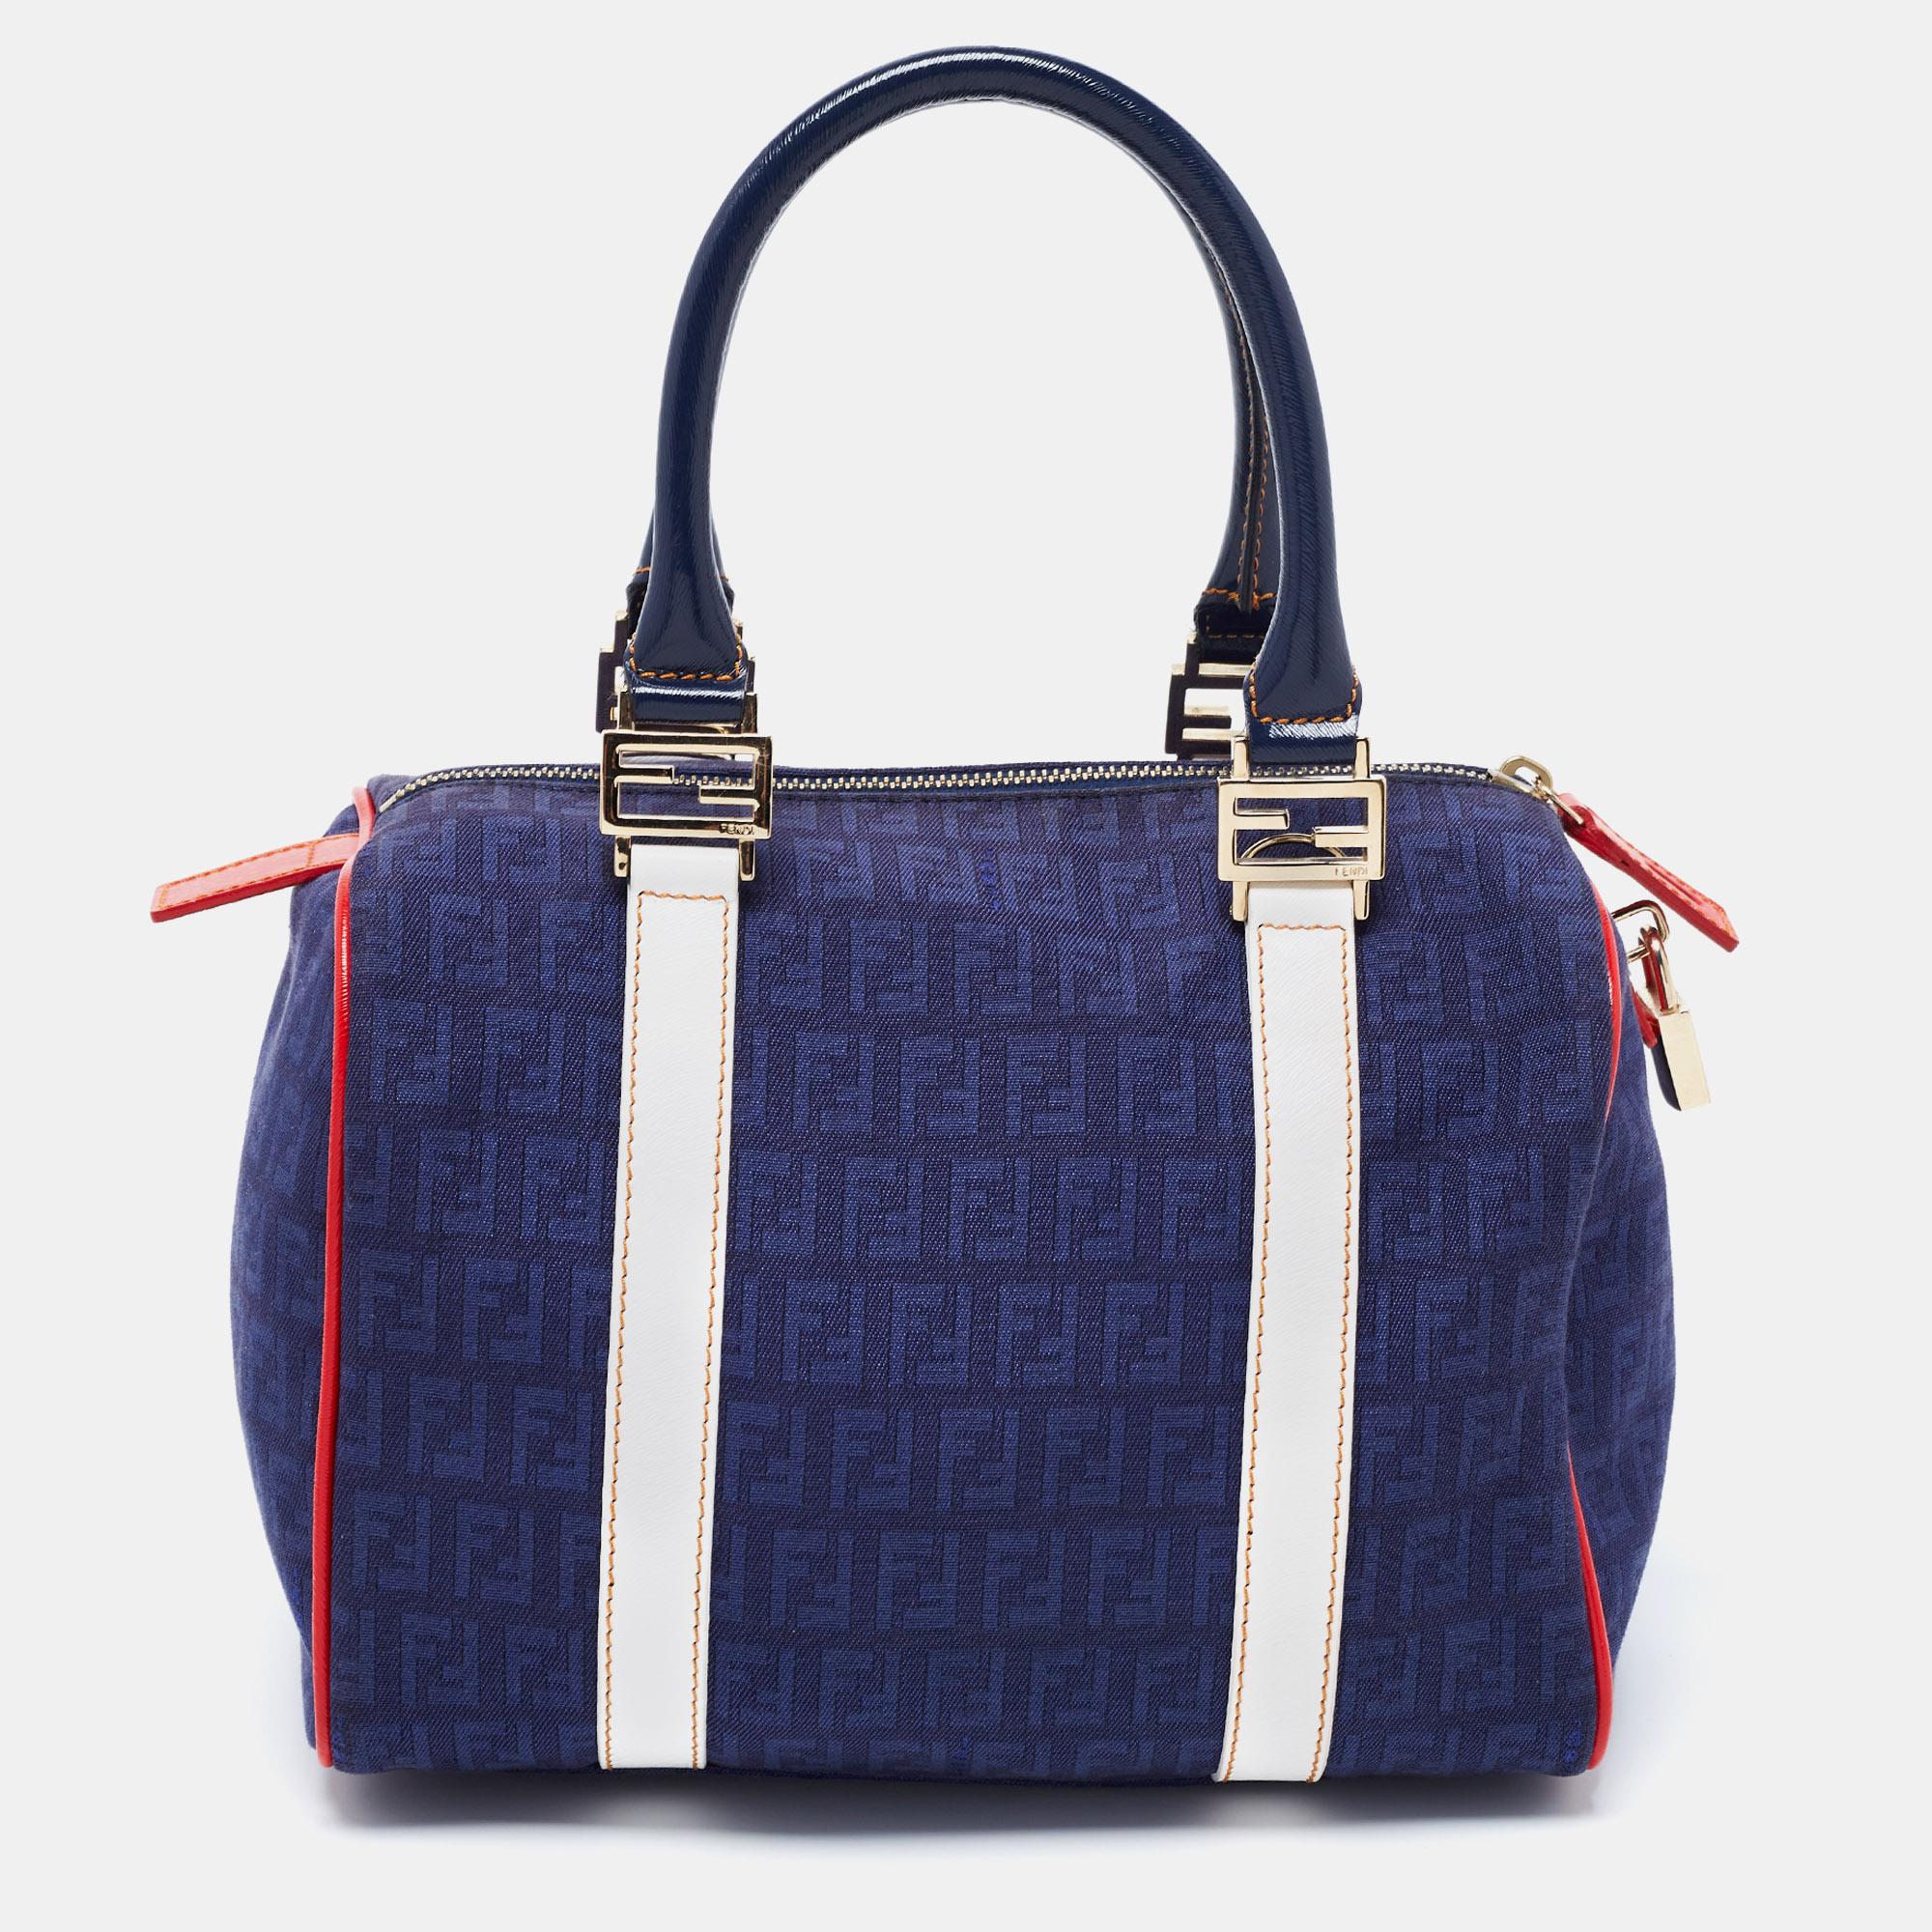 This elegant Forever Bauletto Boston bag from Fendi is crafted from Zucchino canvas and is perfect for daily use. The beautiful bag features splendid details in the form of multiple colors, patent leather trims, dual top handles, and a padlock. The